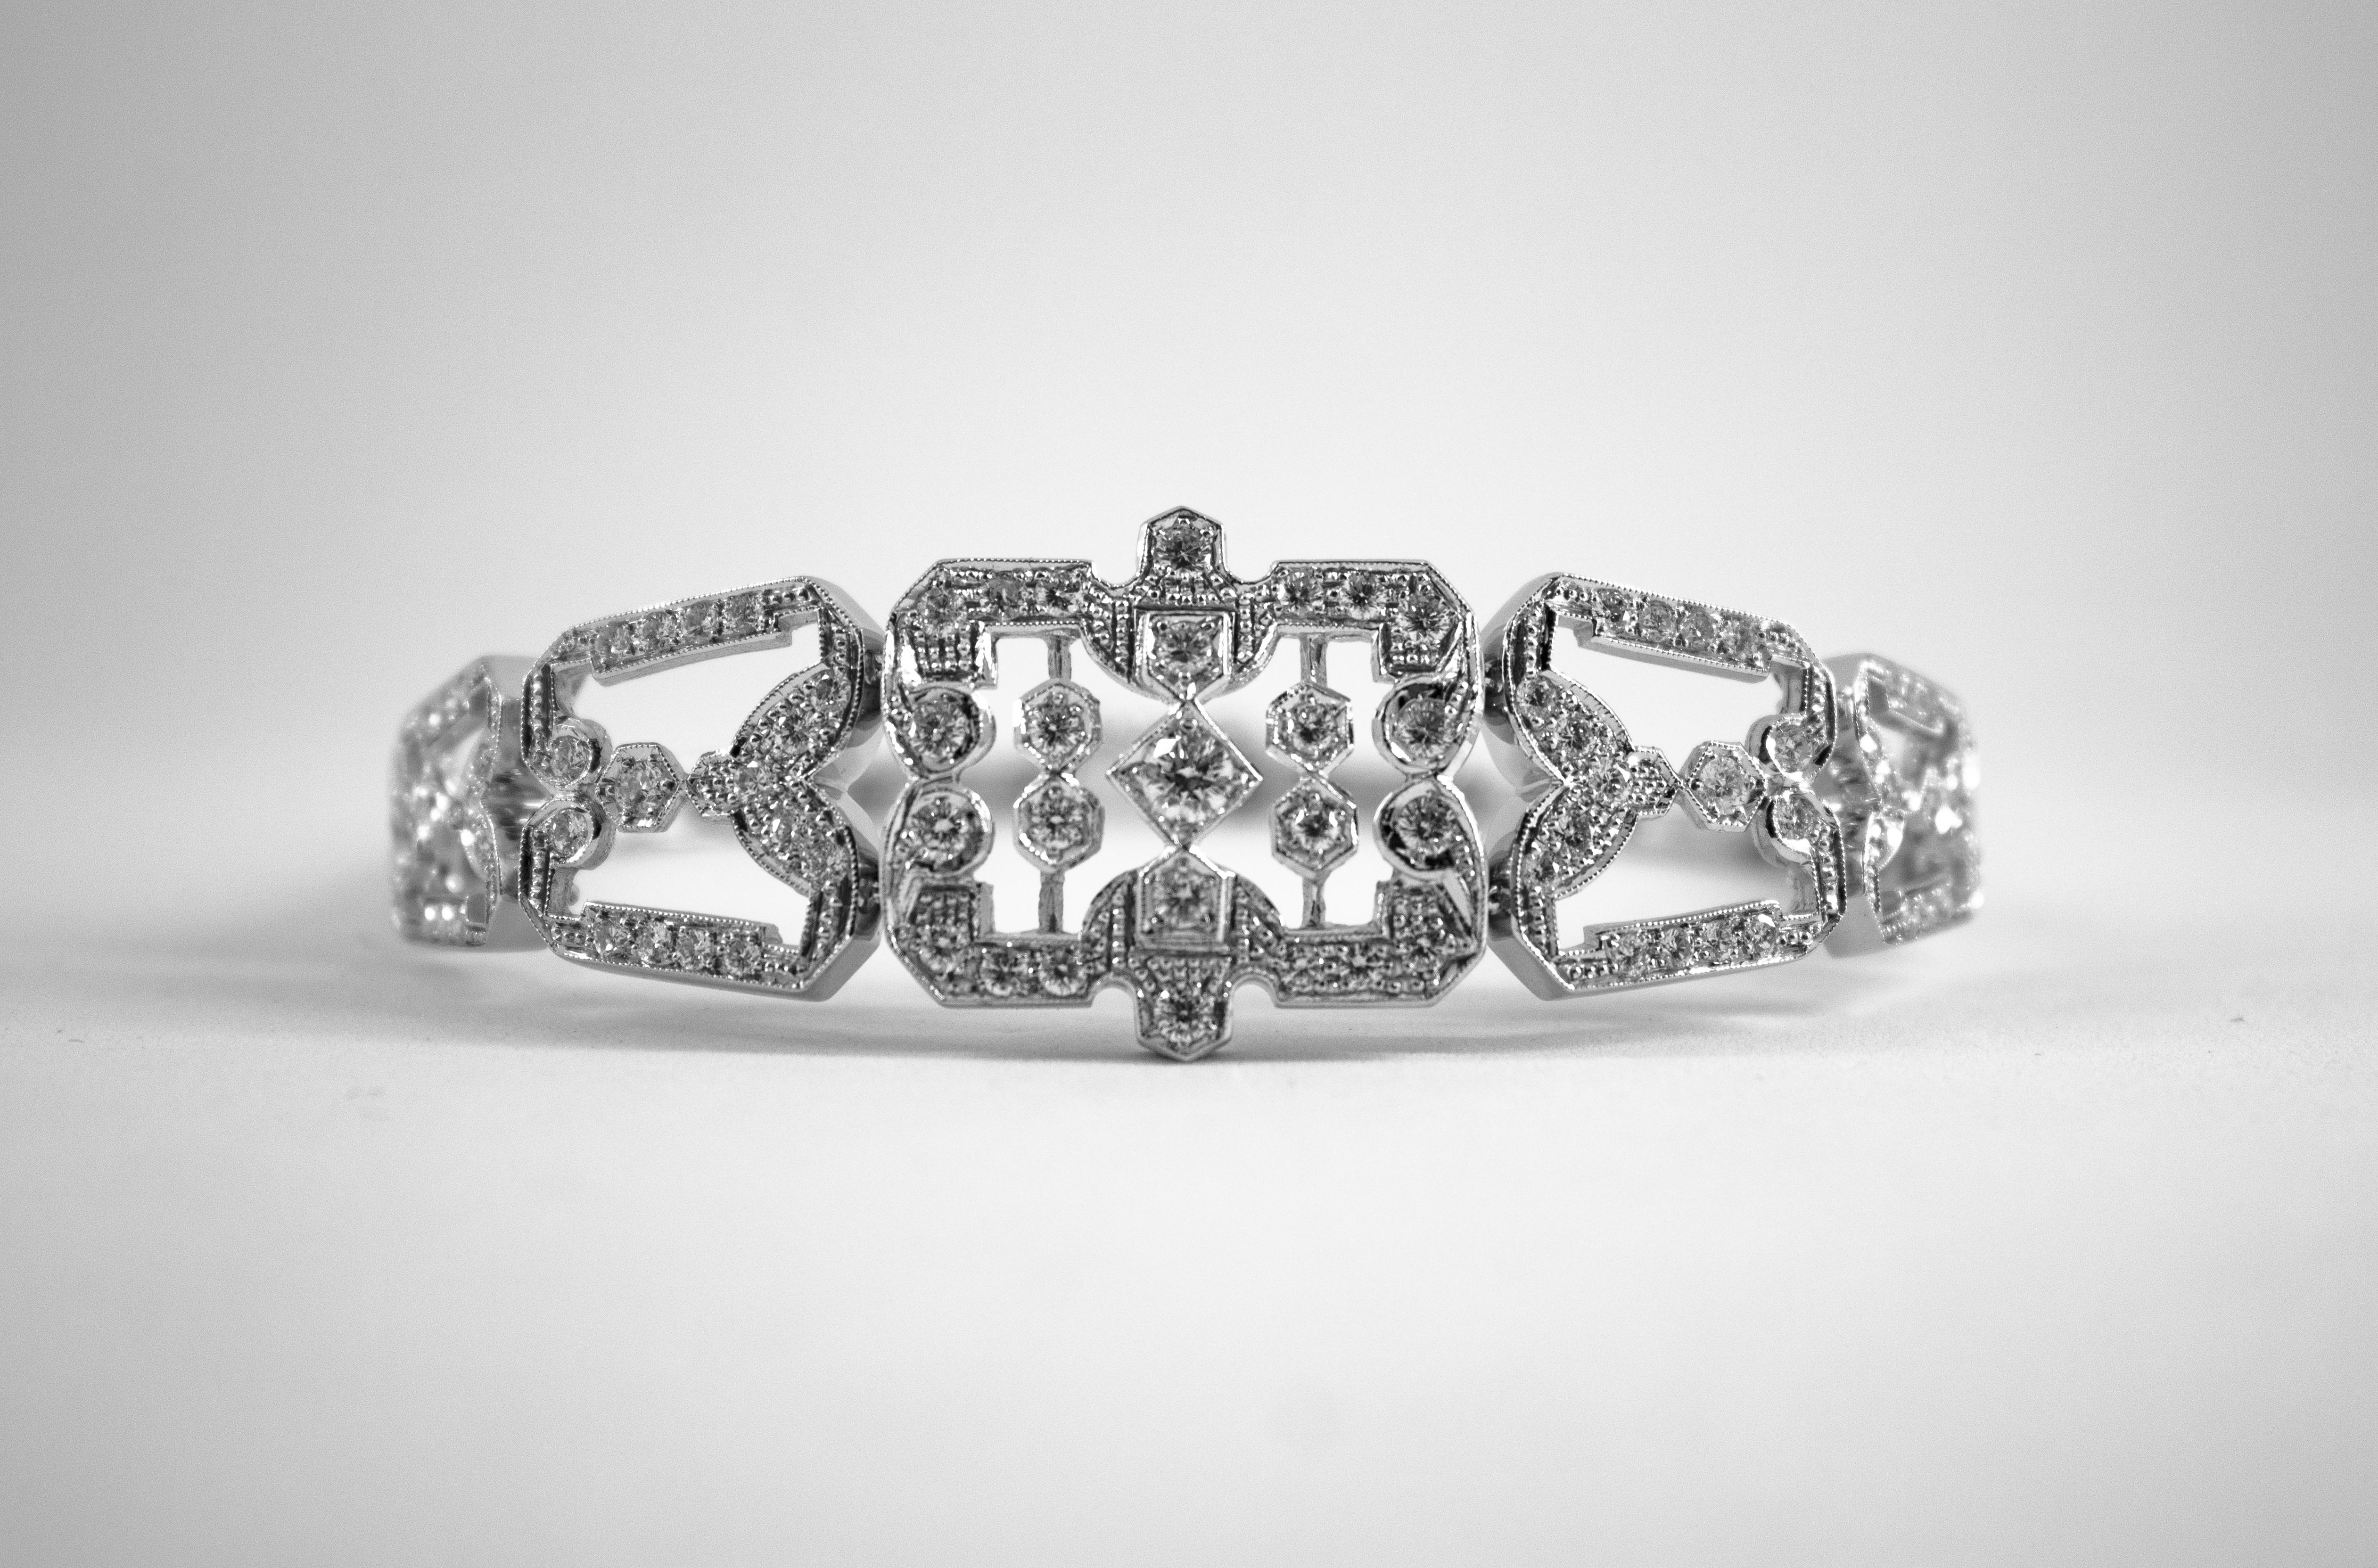 This Bracelet is made of 18K White Gold.
This Bracelet has 2.40 Carats of White Brilliant Cut Diamonds.
This Bracelet is inspired by Art Deco.

We're a workshop so every piece is handmade, customizable and resizable.